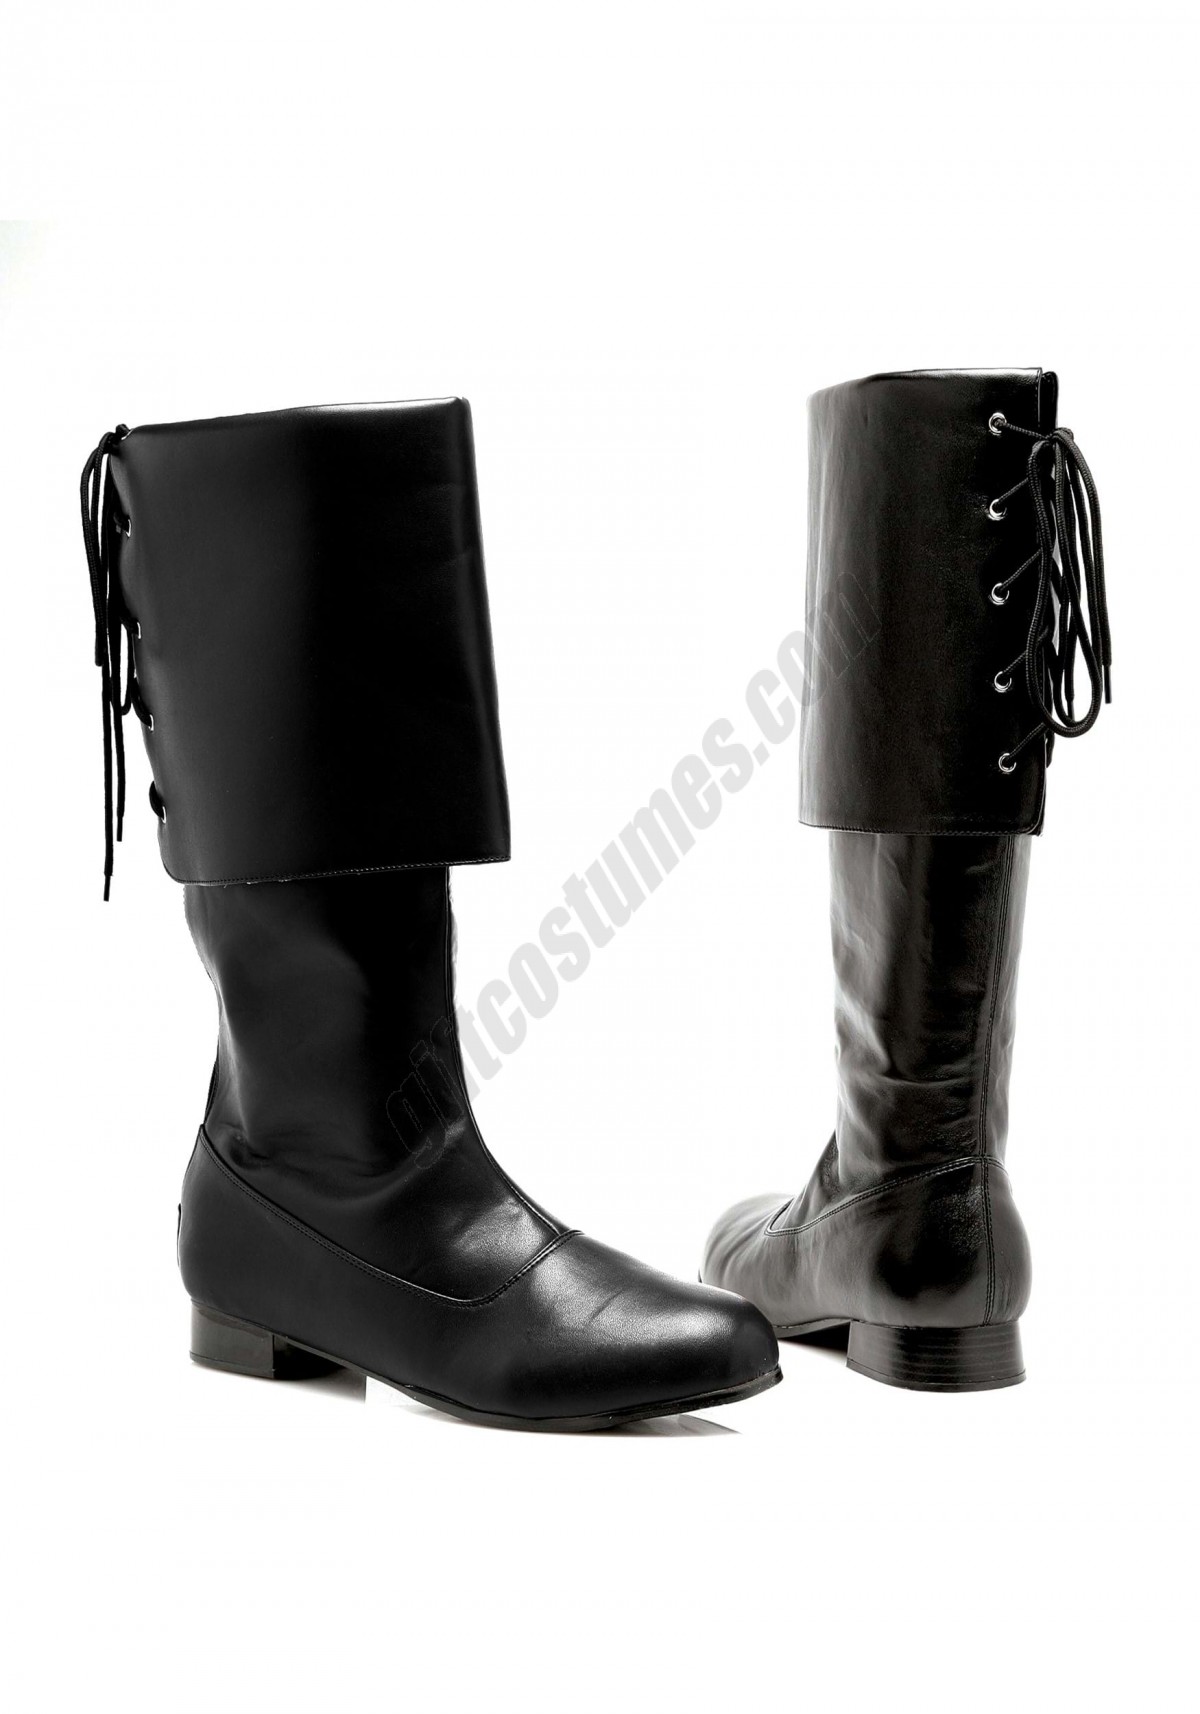 Black Women's Pirate Boots Promotions - -0